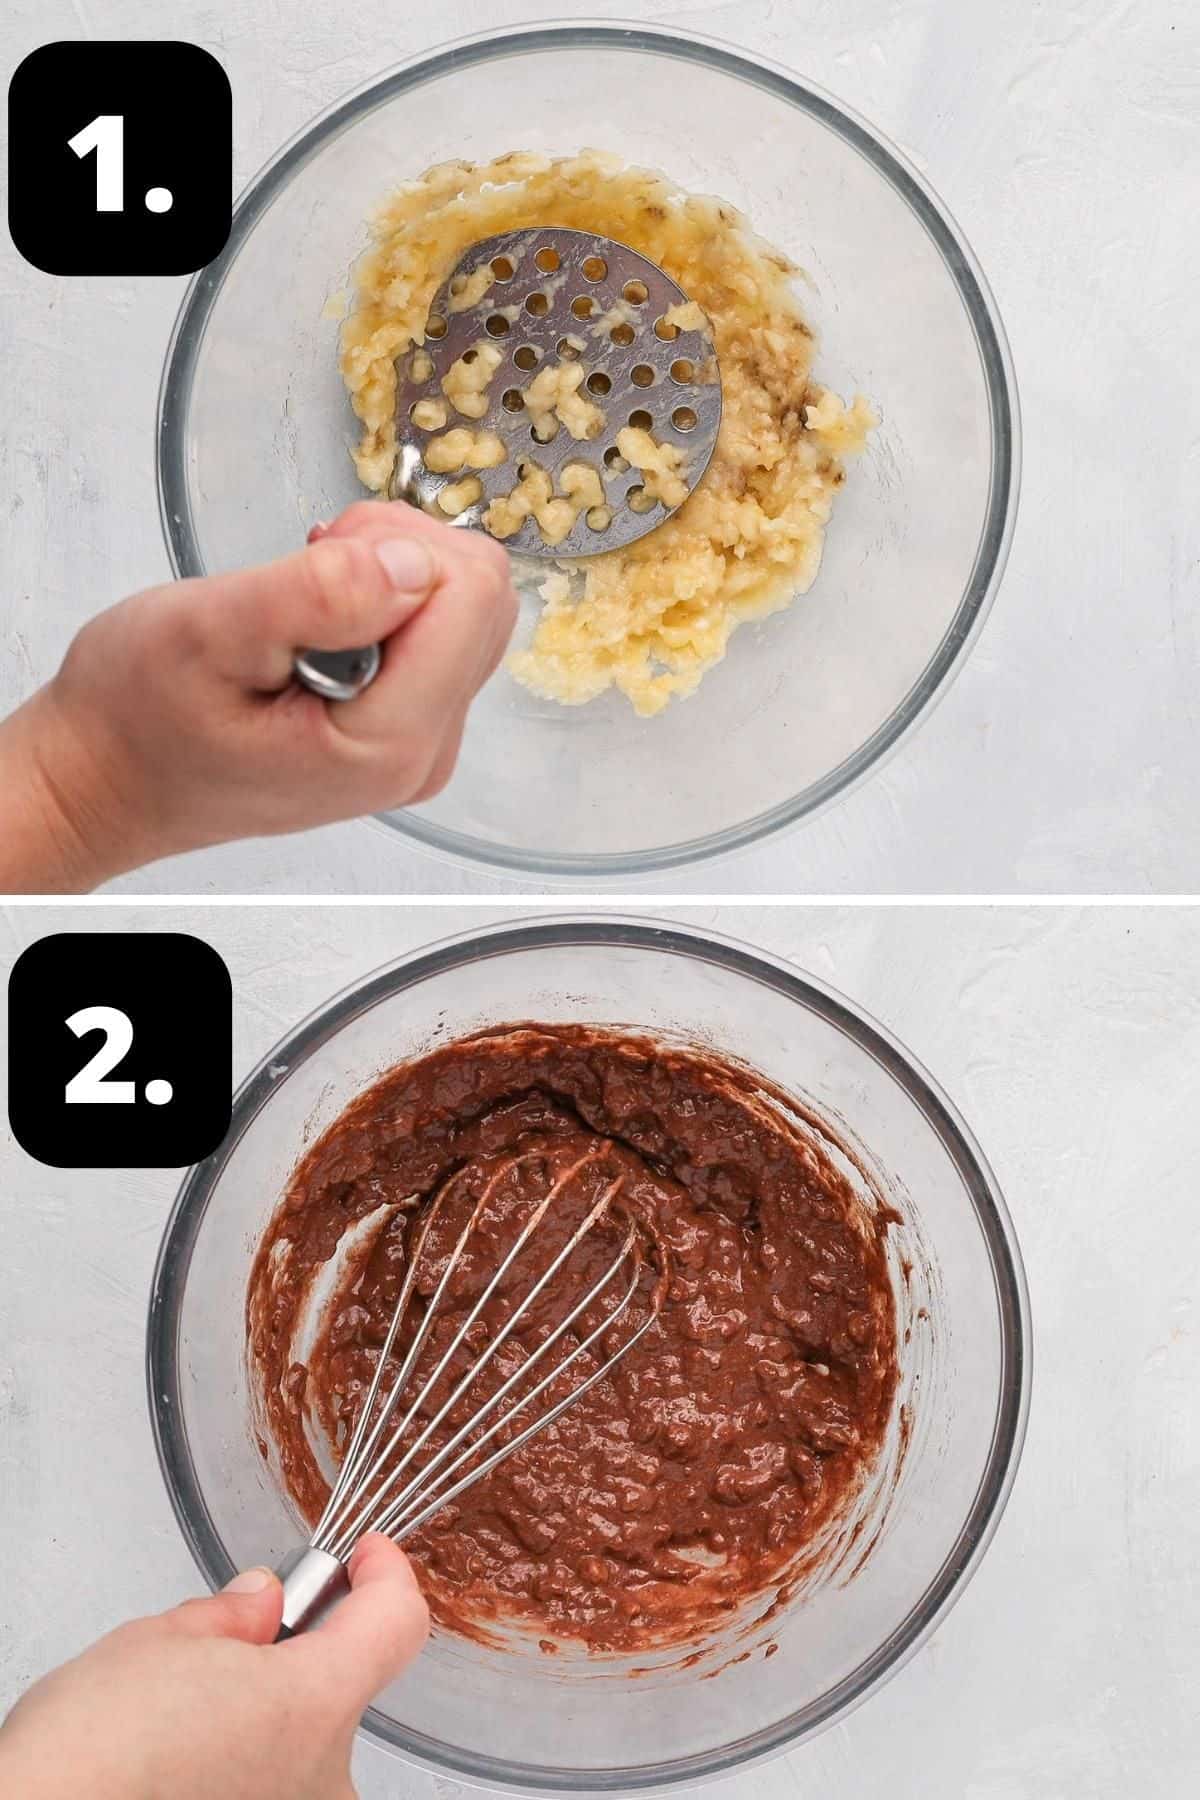 Steps 1-2 of preparing this recipe - mashing the banana in a bowl and mixing in the cacao, vanilla and maple syrup.